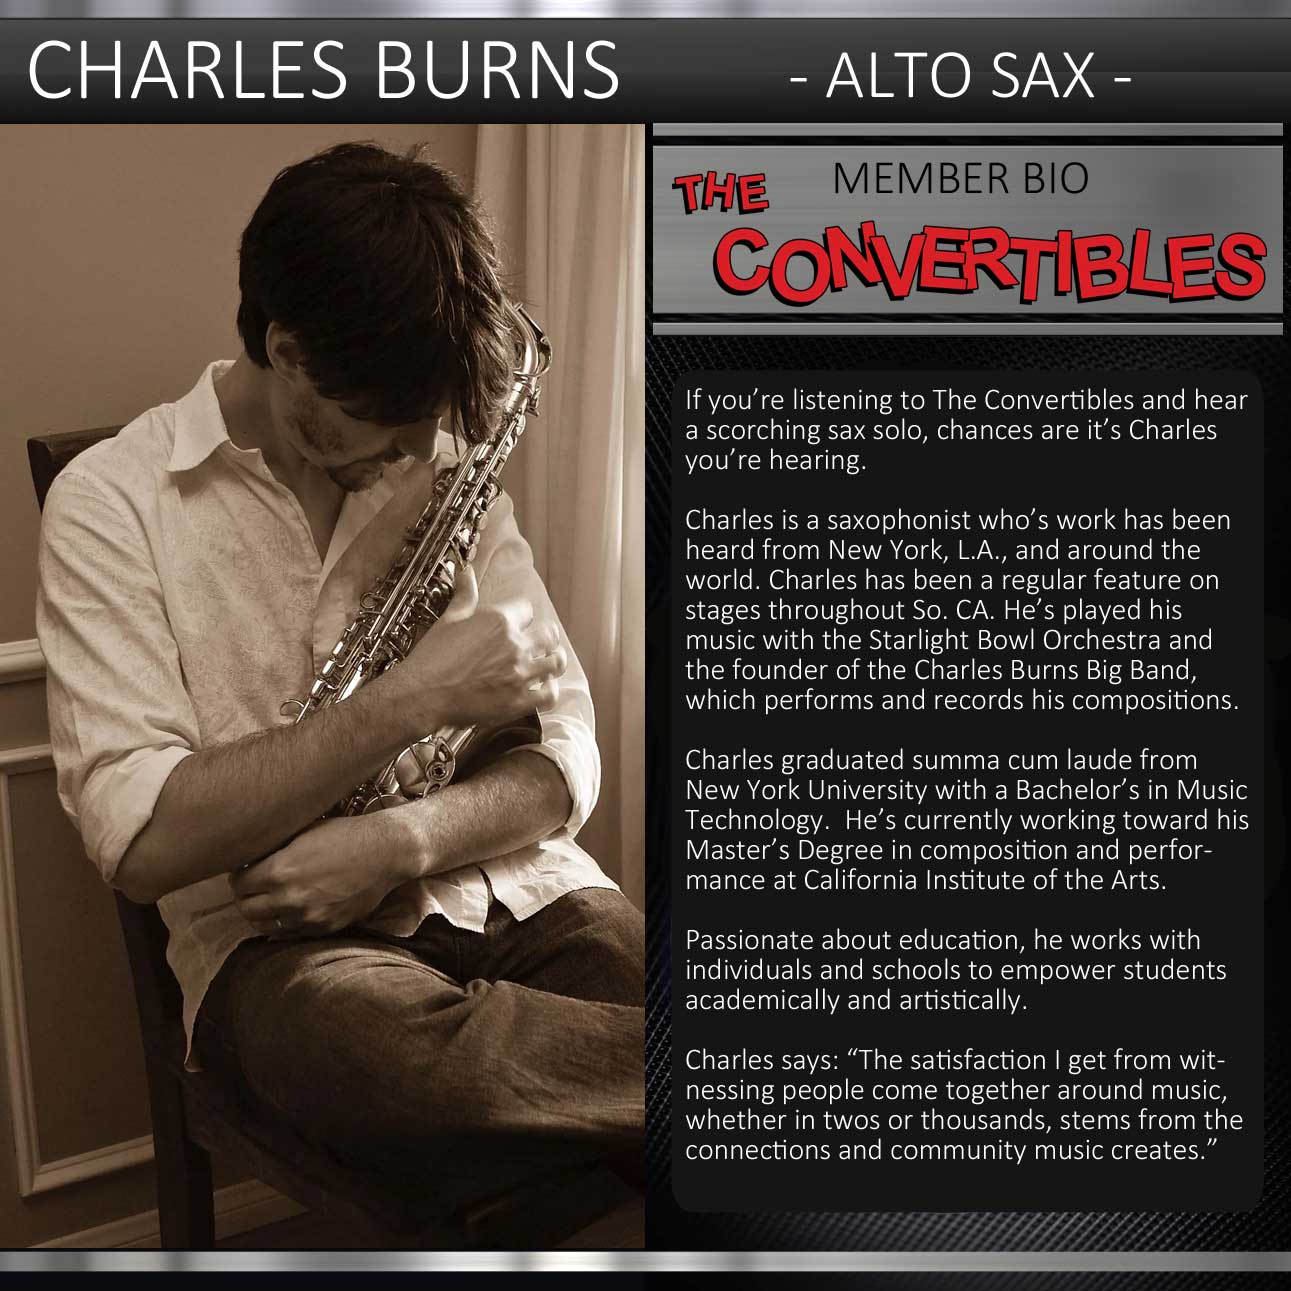 Charles Burns immense contribution to The Convertibles comes in by the way of scorching sax solos and his soulful stage presence.